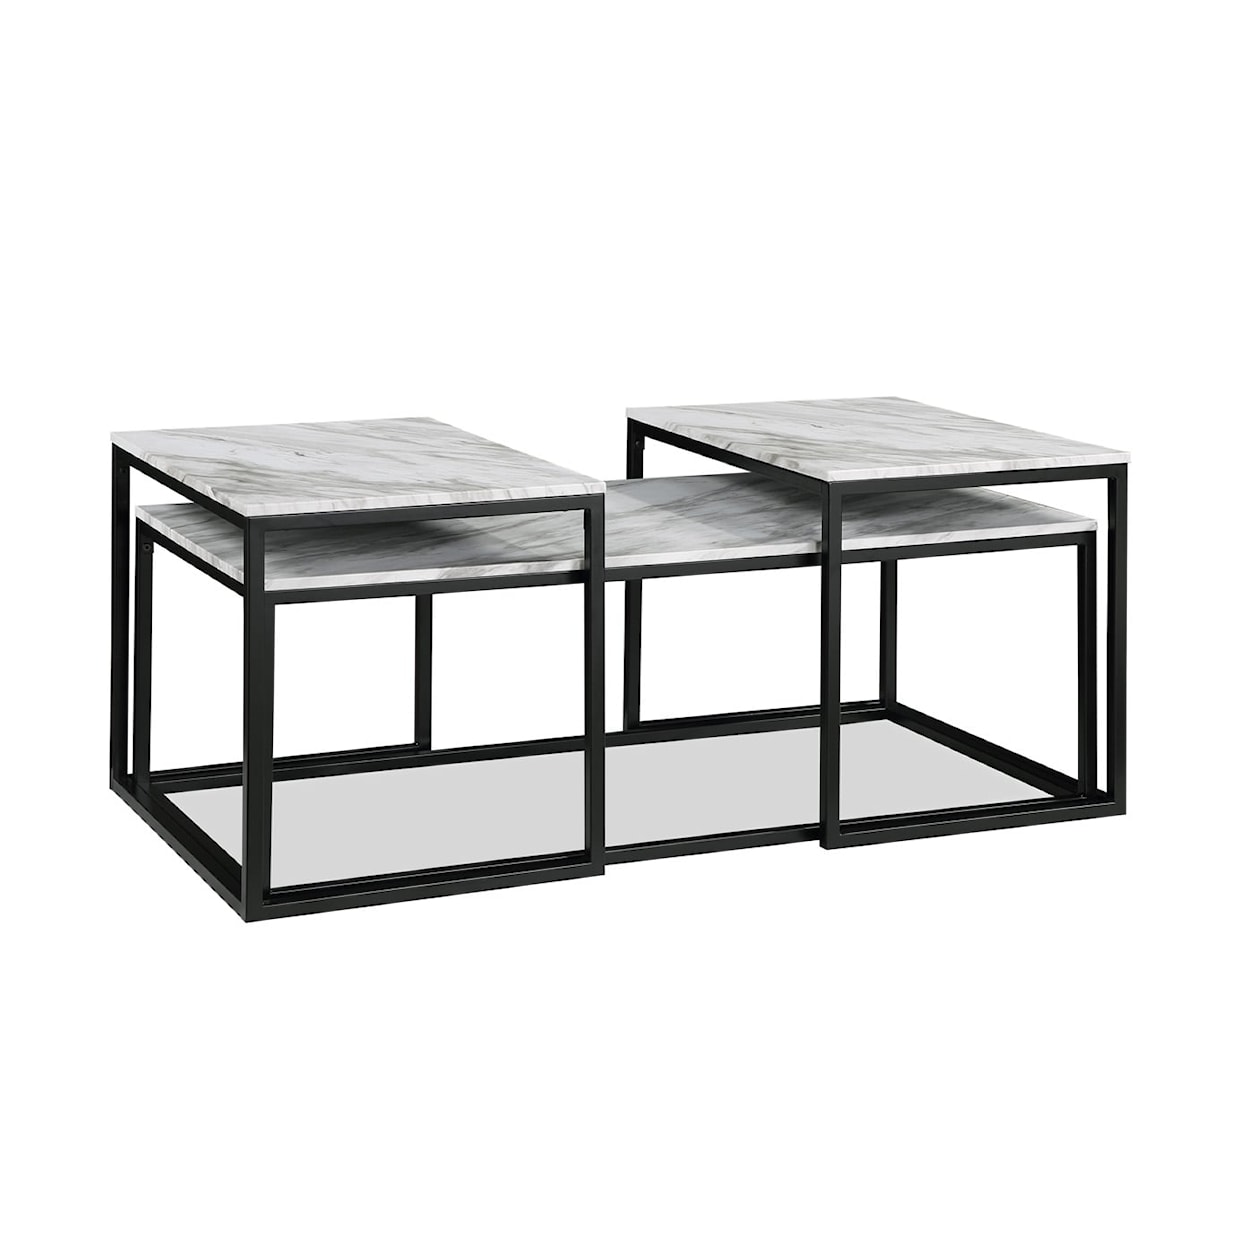 Crown Mark Adola DOLLY WHITE 3 PACK NESTING TABLES |